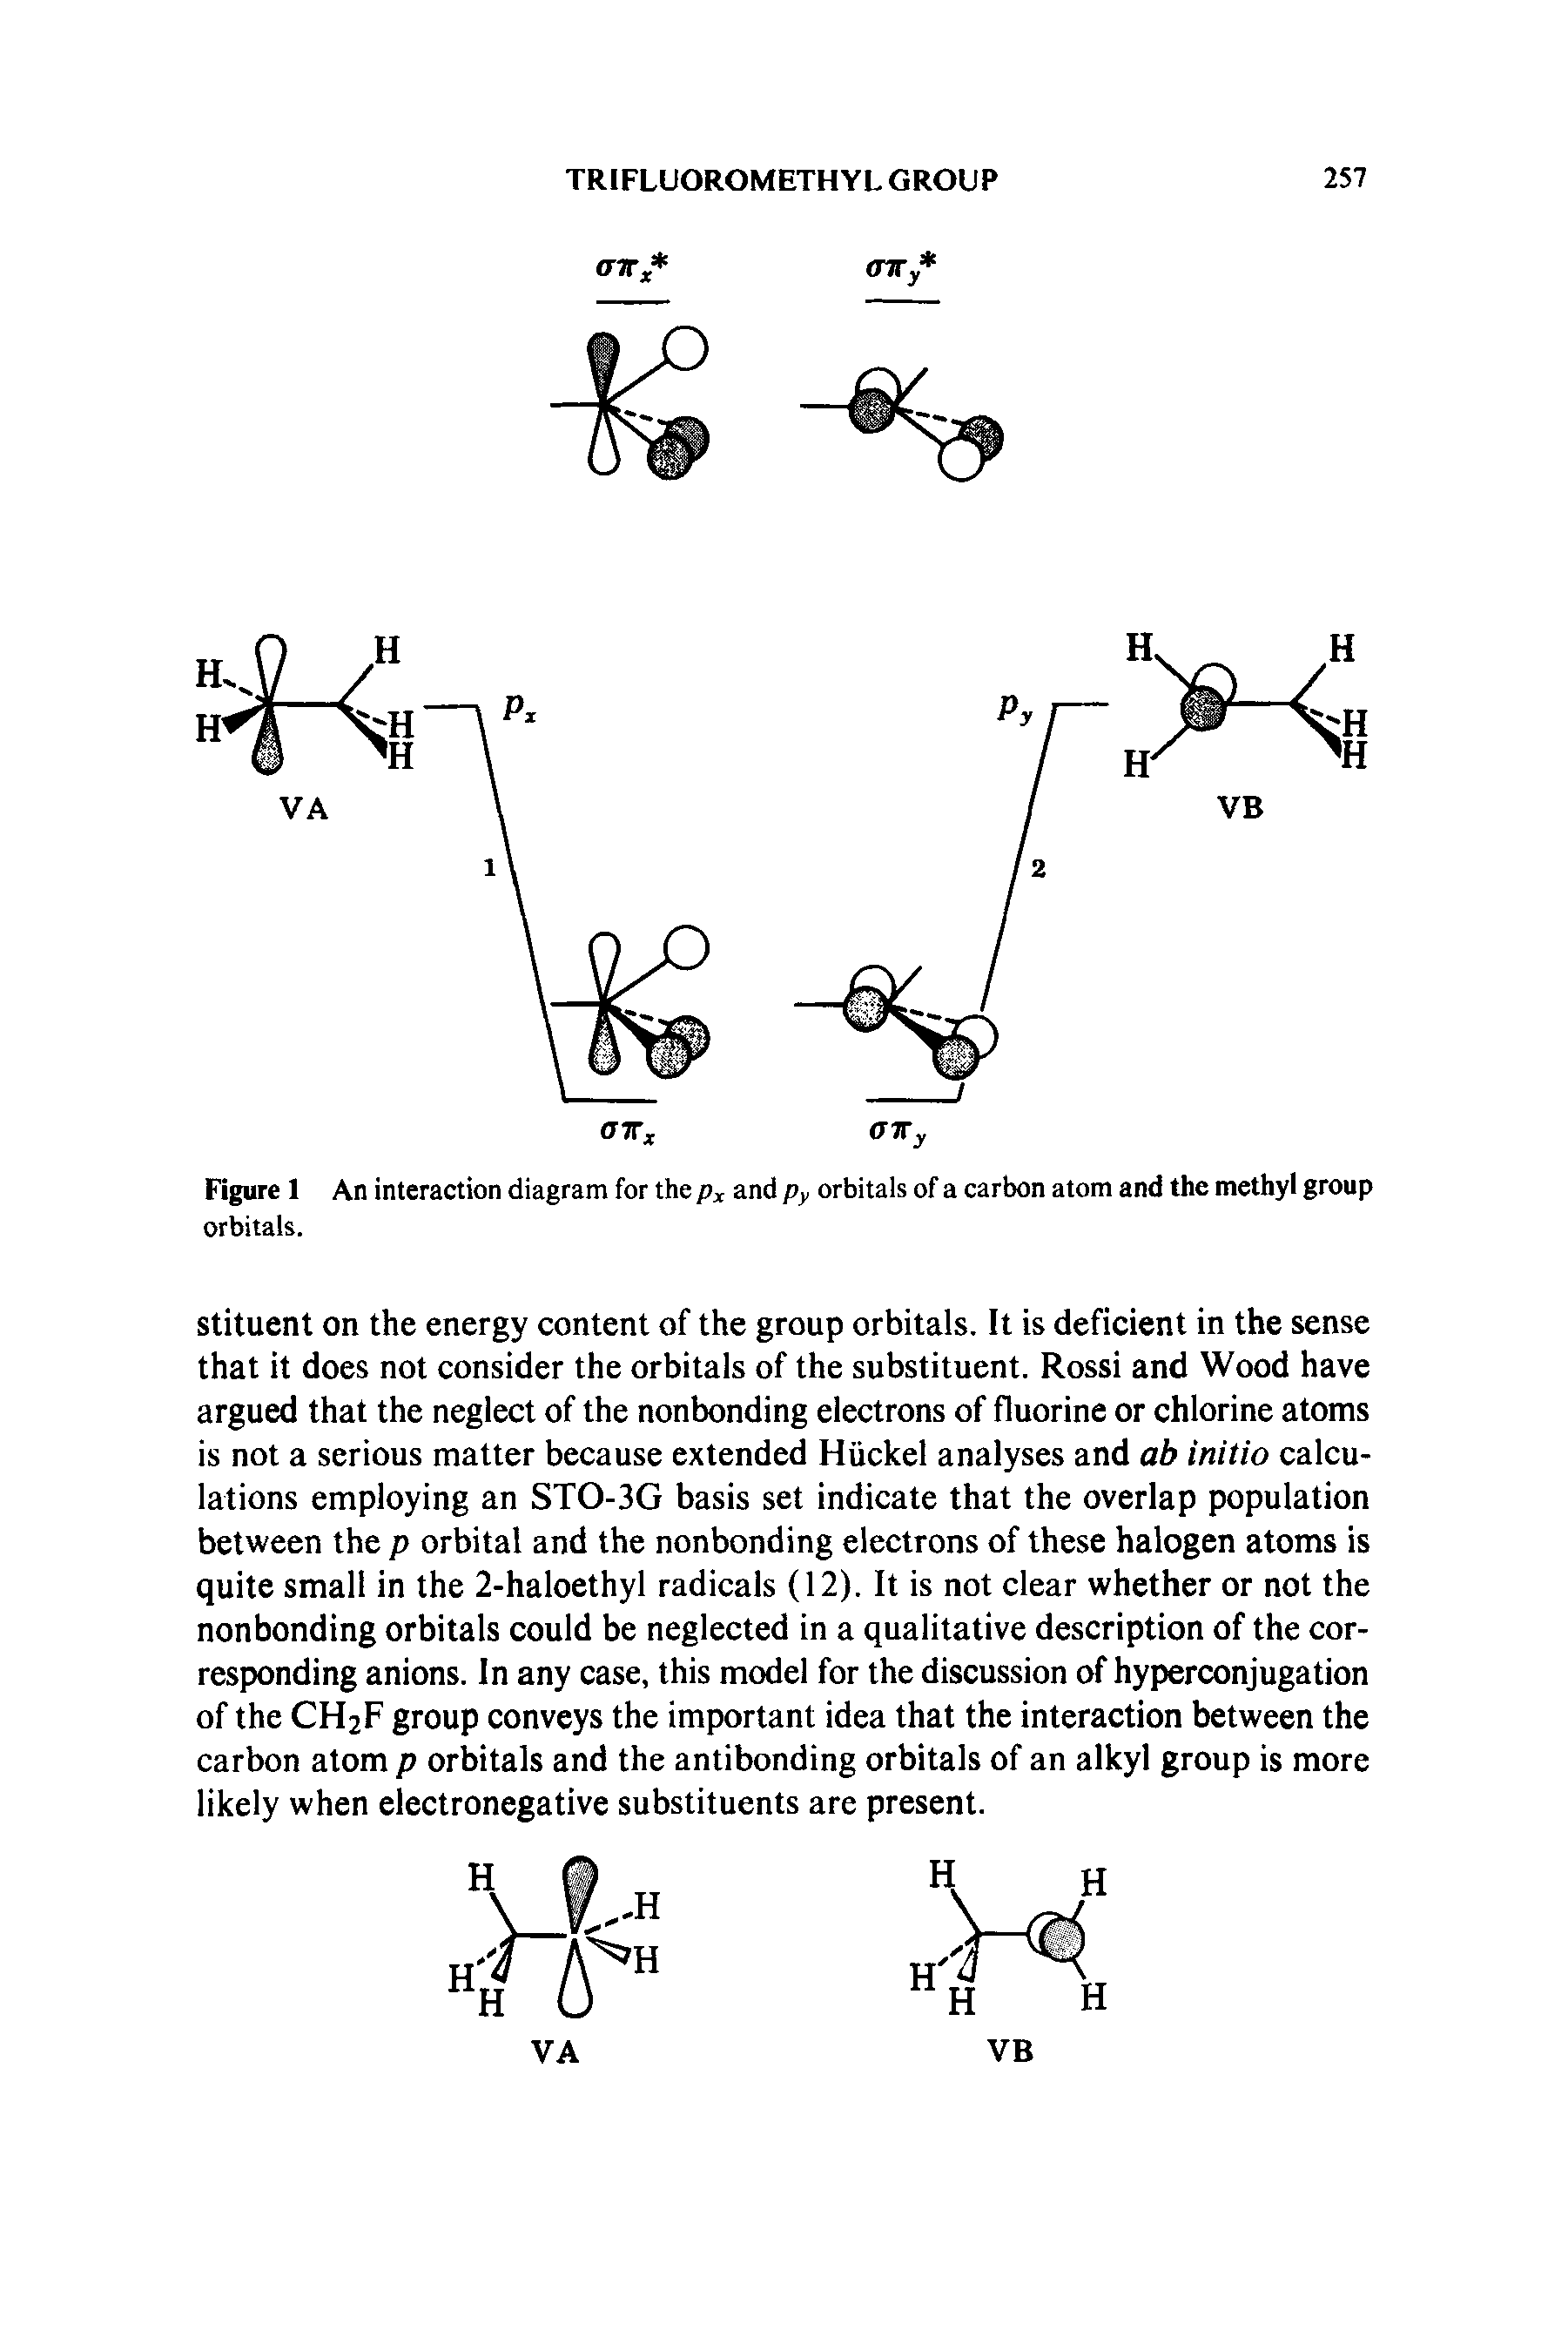 Figure 1 An interaction diagram for the Px and py orbitals of a carbon atom and the methyl group orbitals.